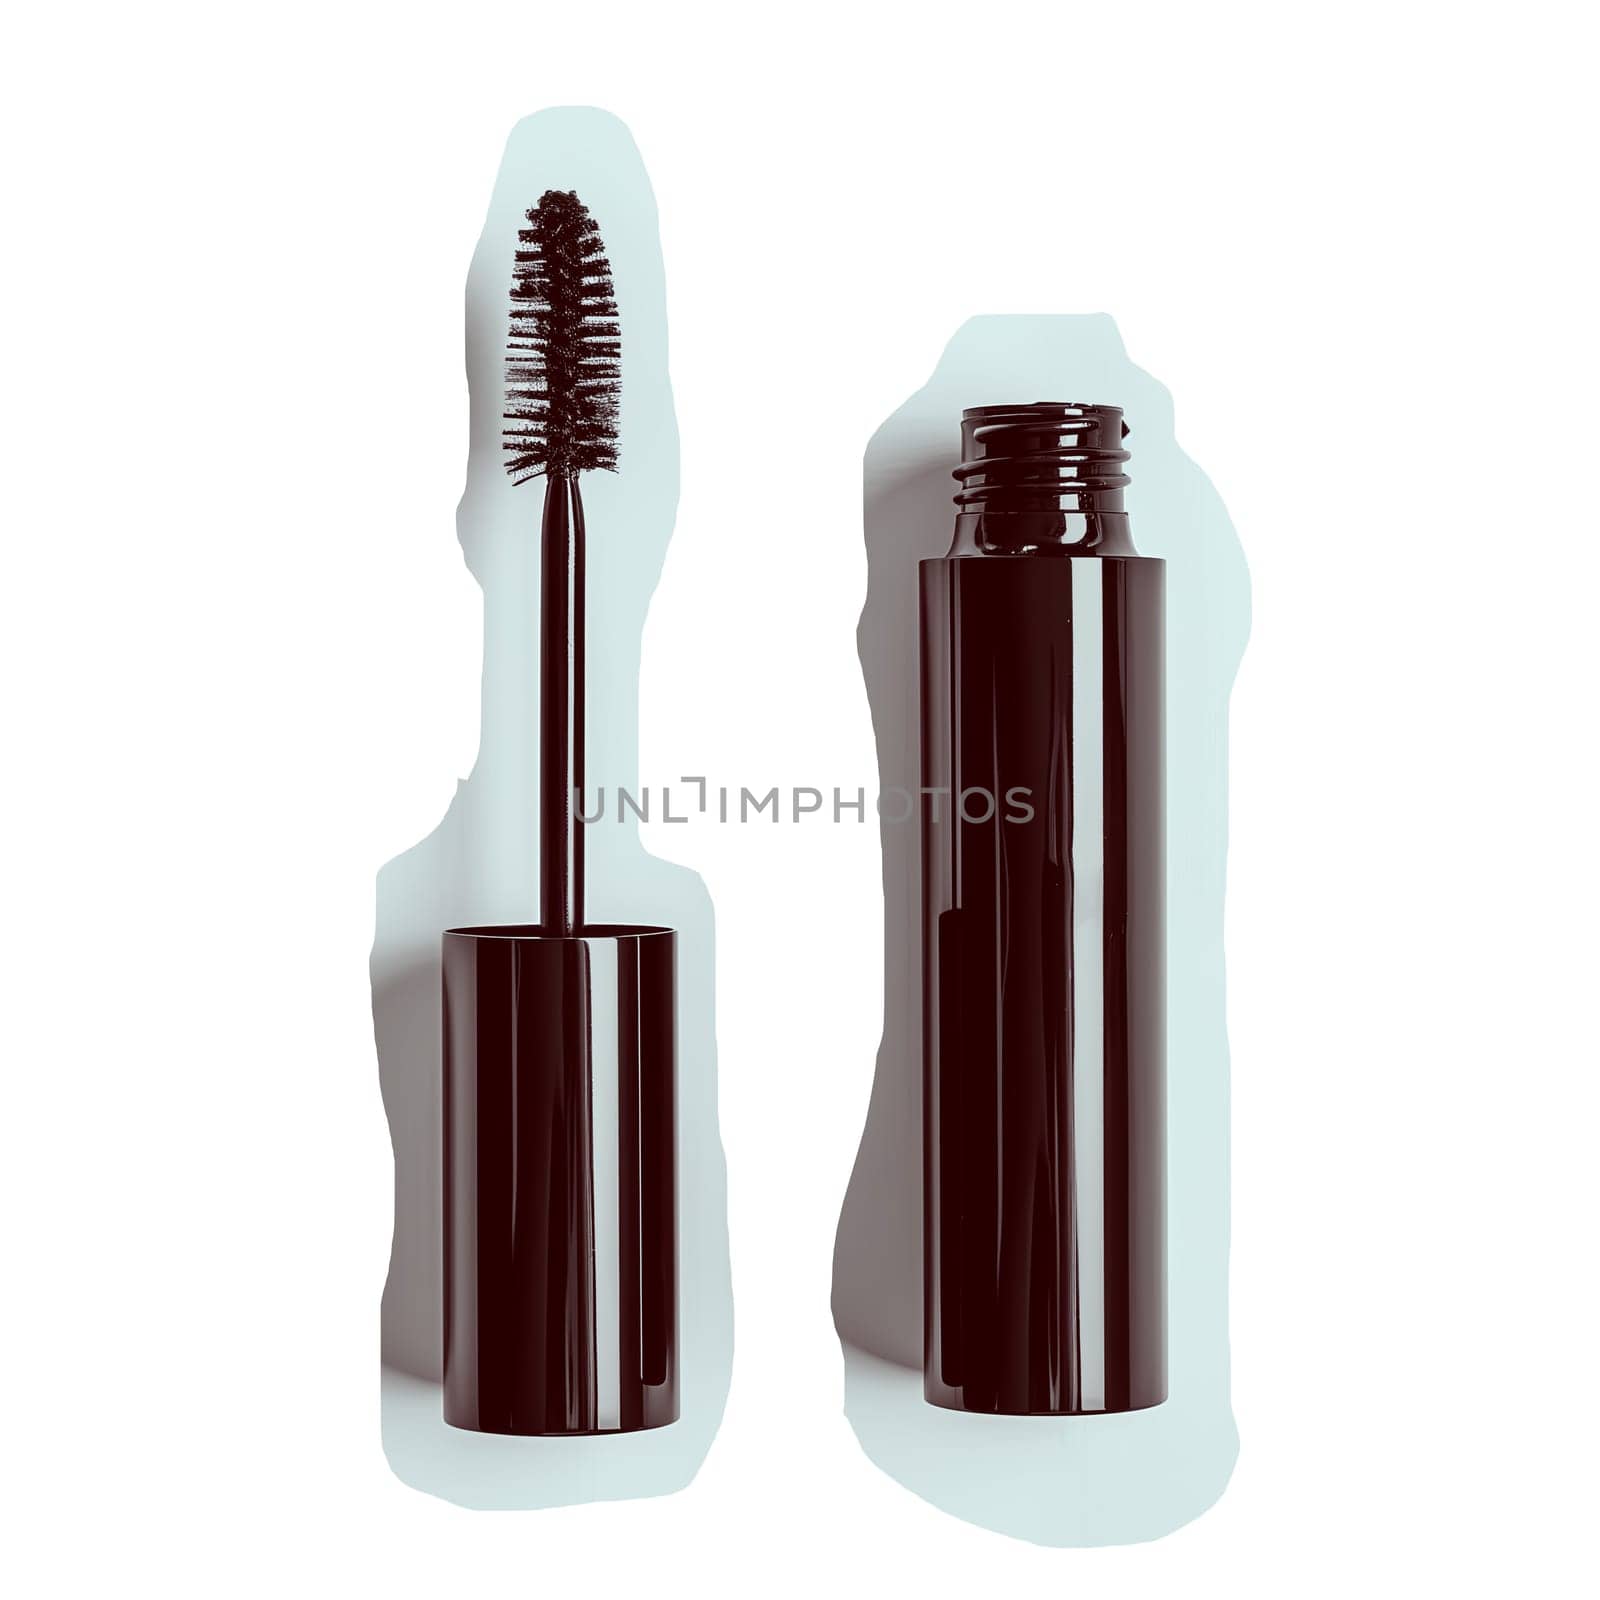 Black tube of mascara with a brush applicator by Dustick